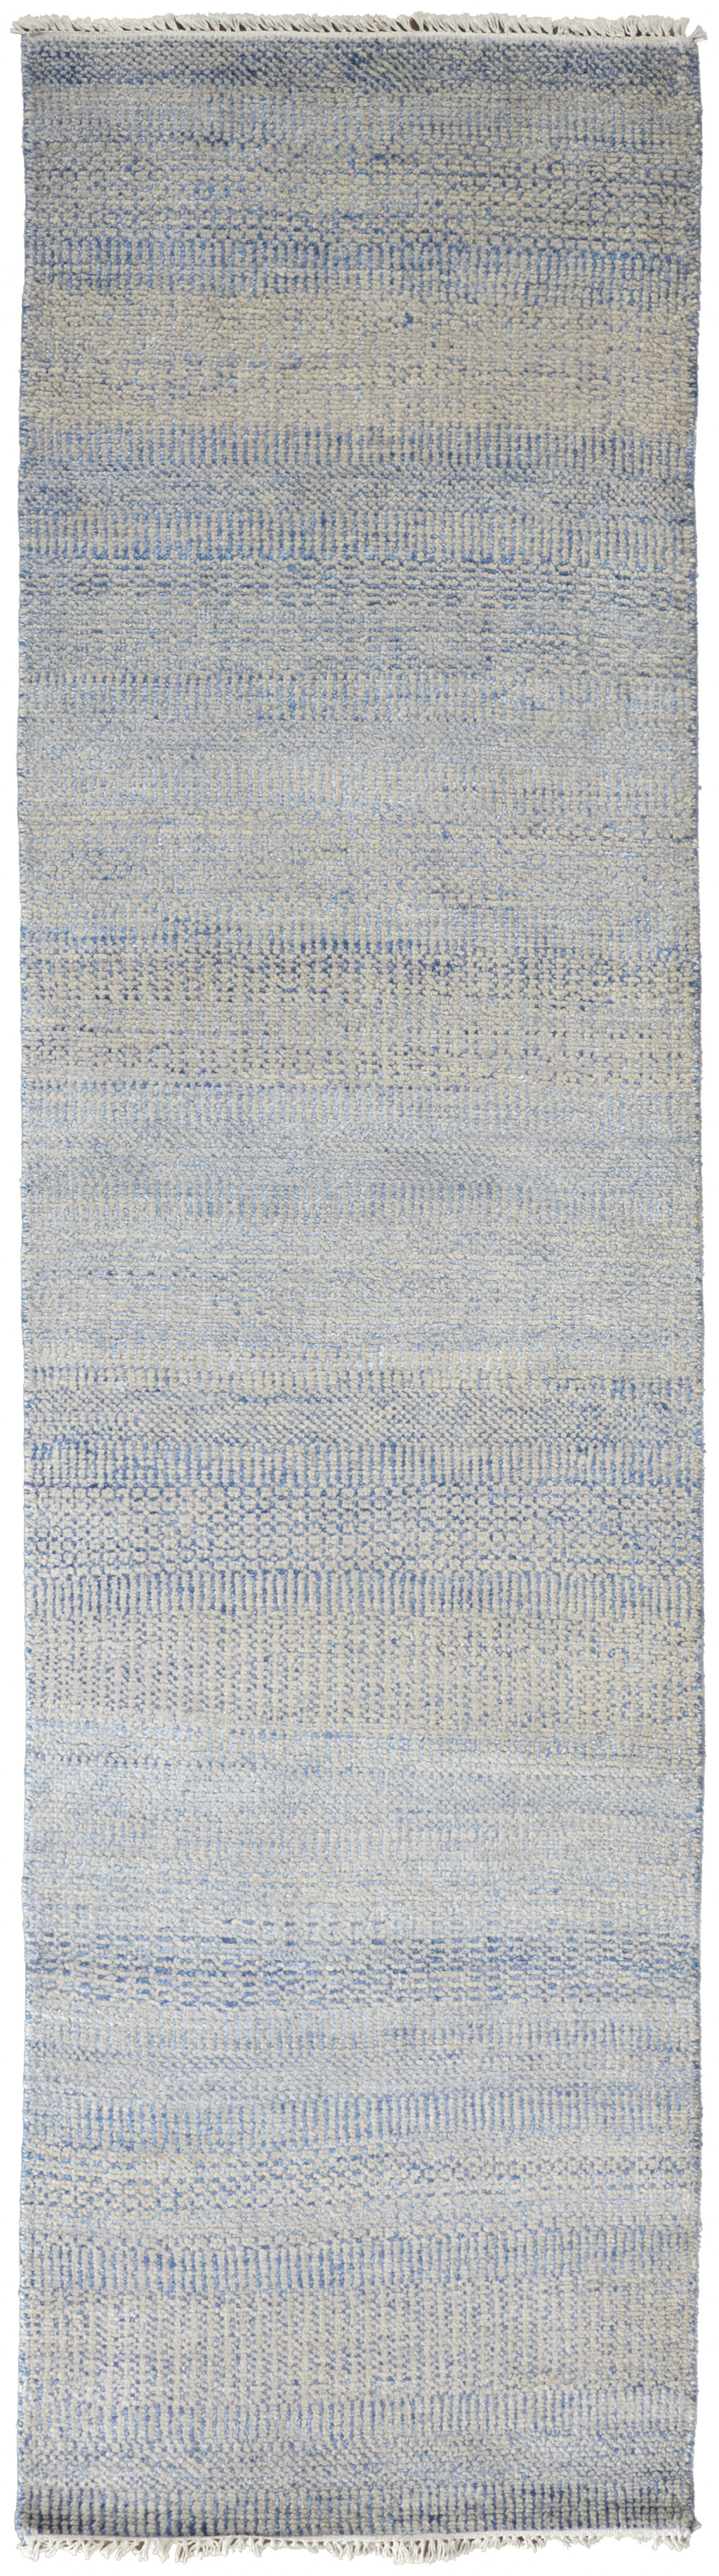 12' Blue And Silver Wool Striped Hand Knotted Runner Rug-513849-1